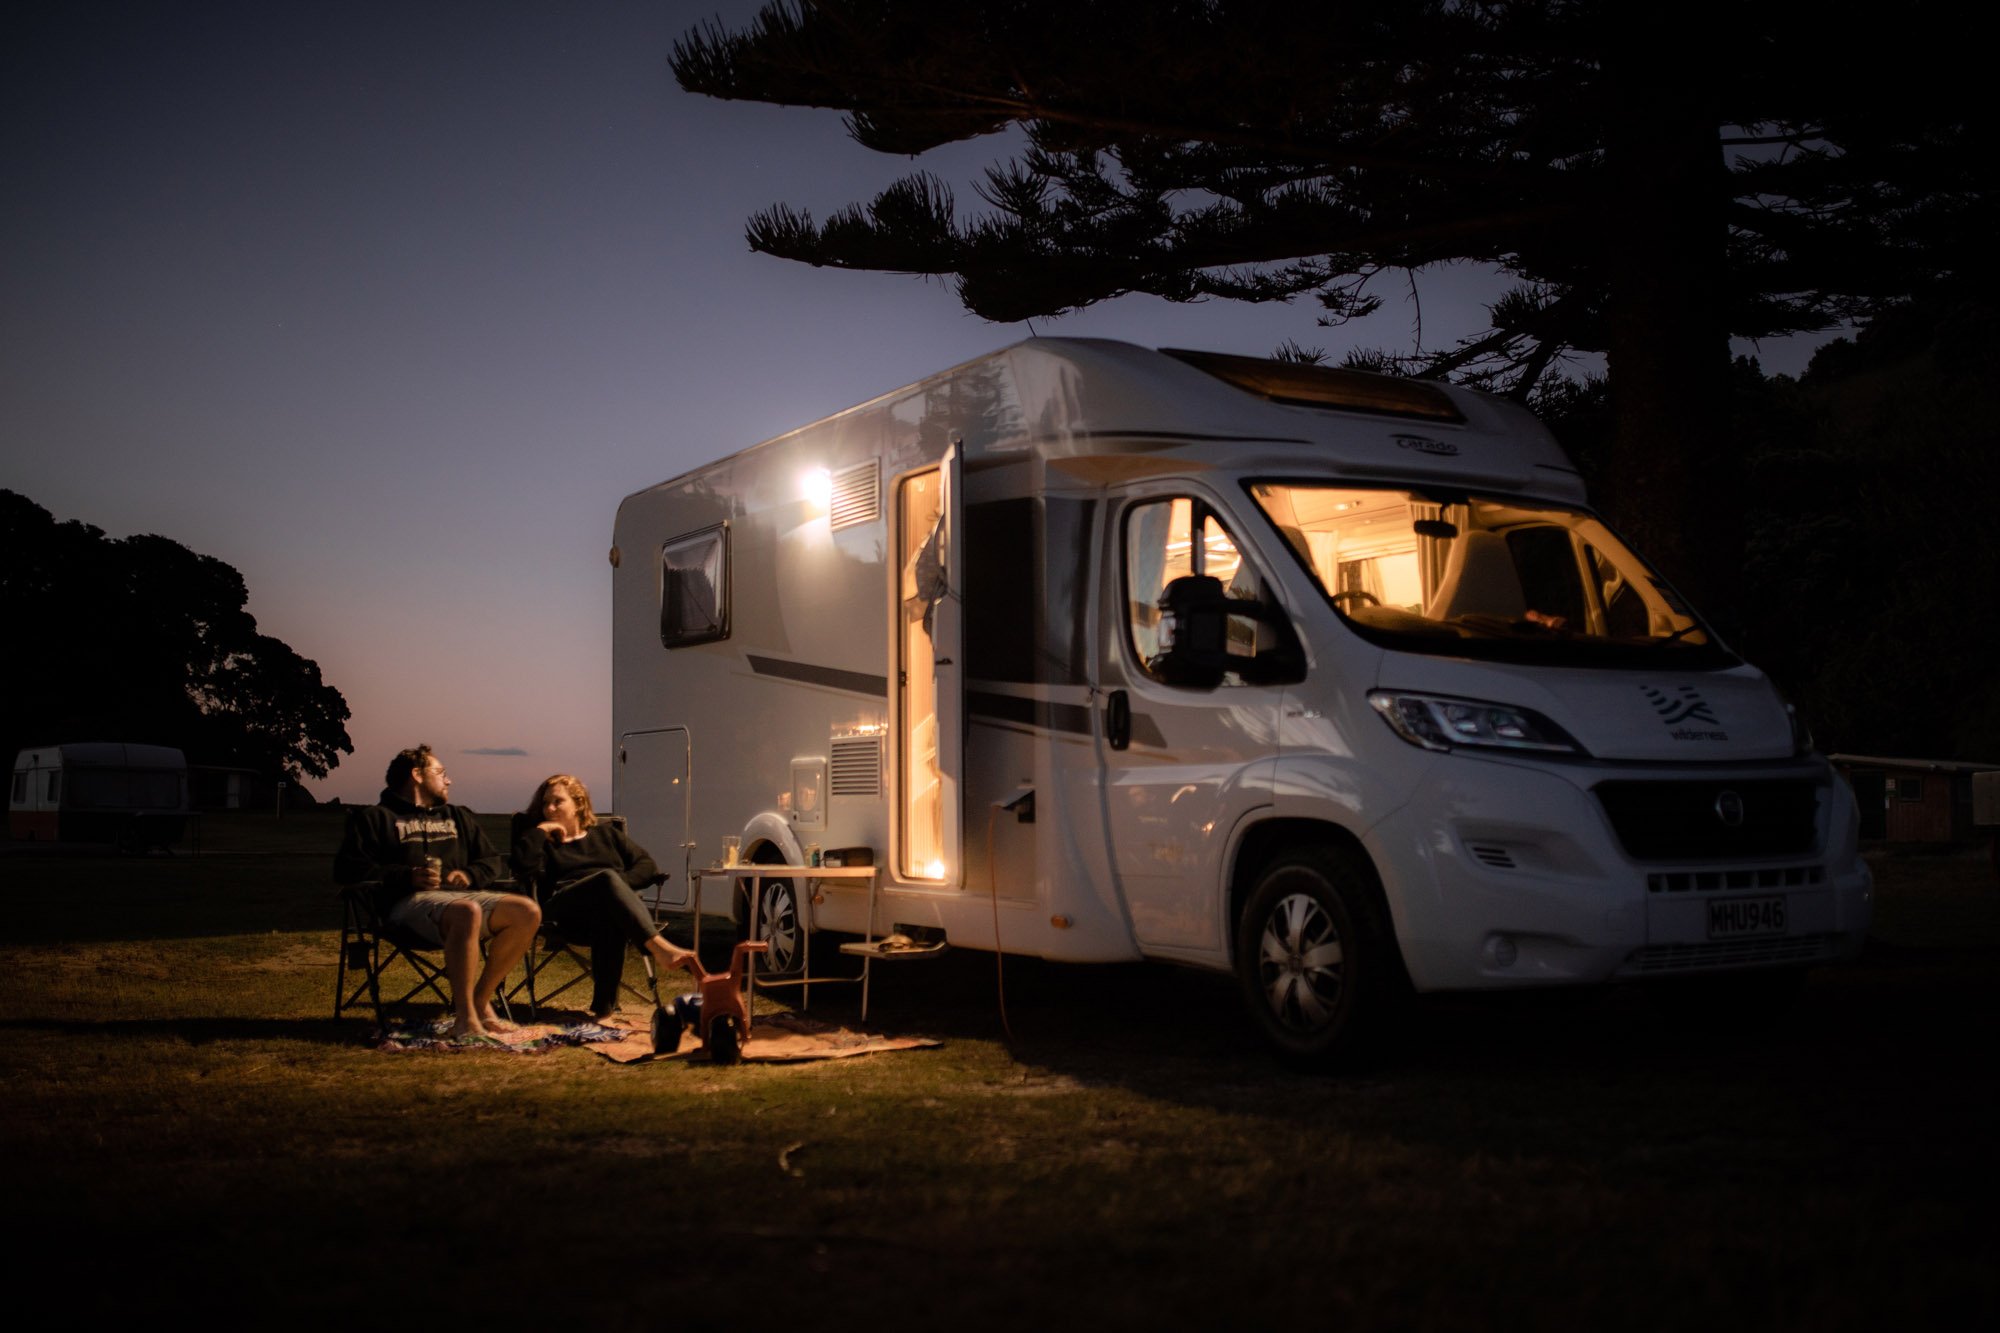 mum and dad outside motorhome on camping chairs while baby naps